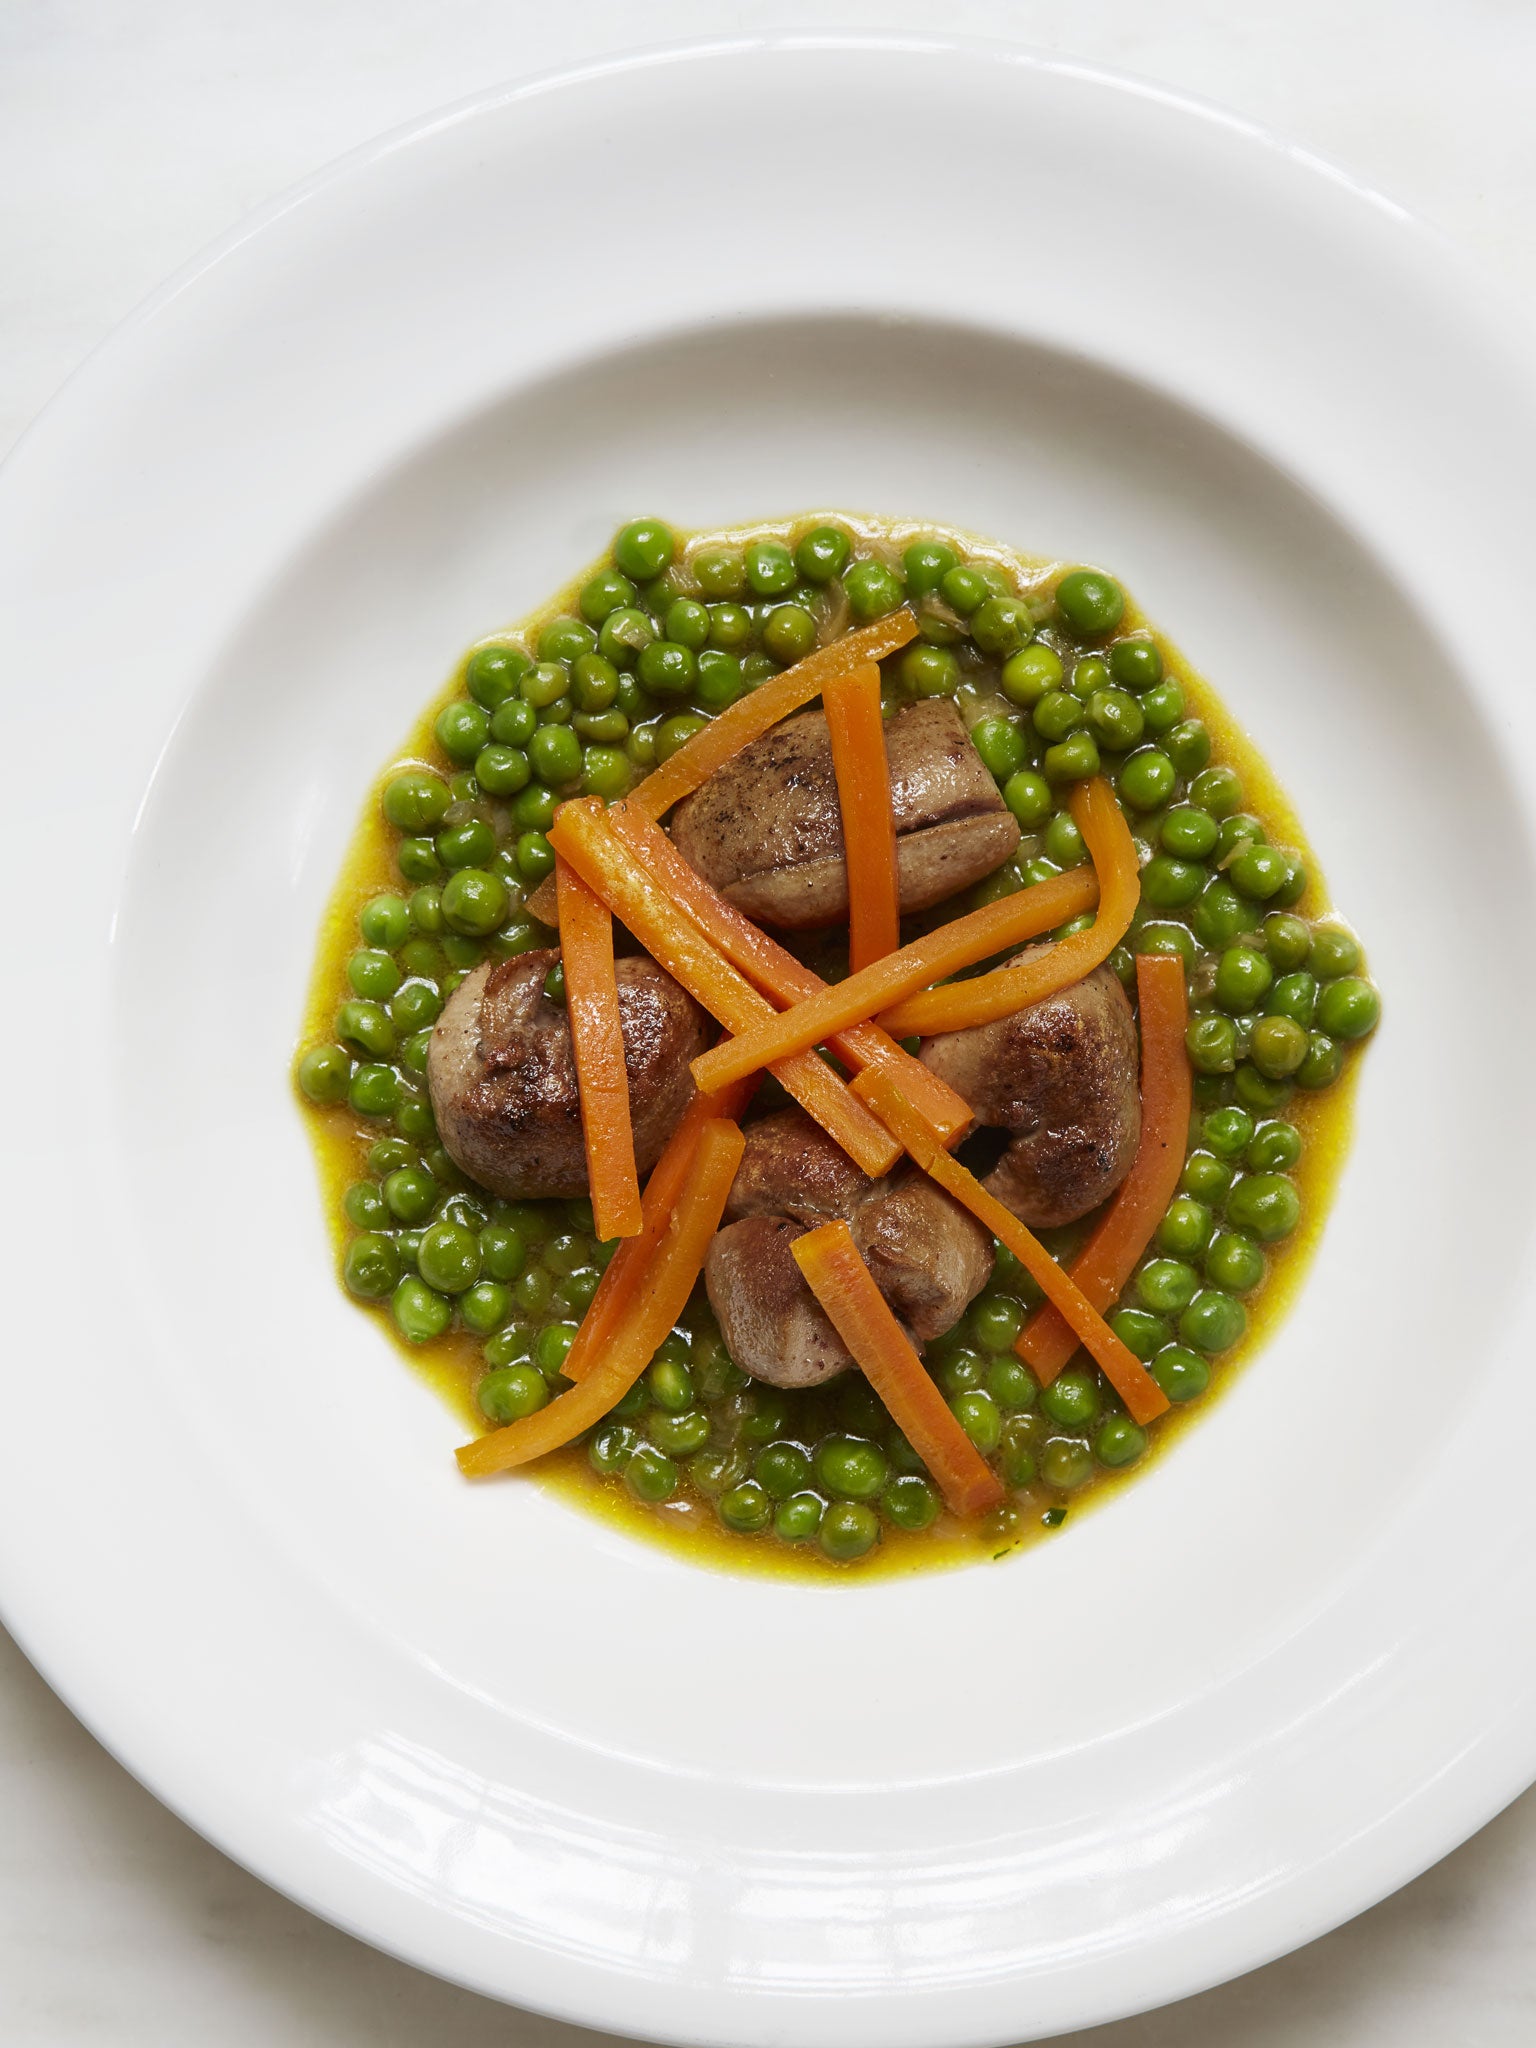 Veal kidneys with peas, orange and carrots